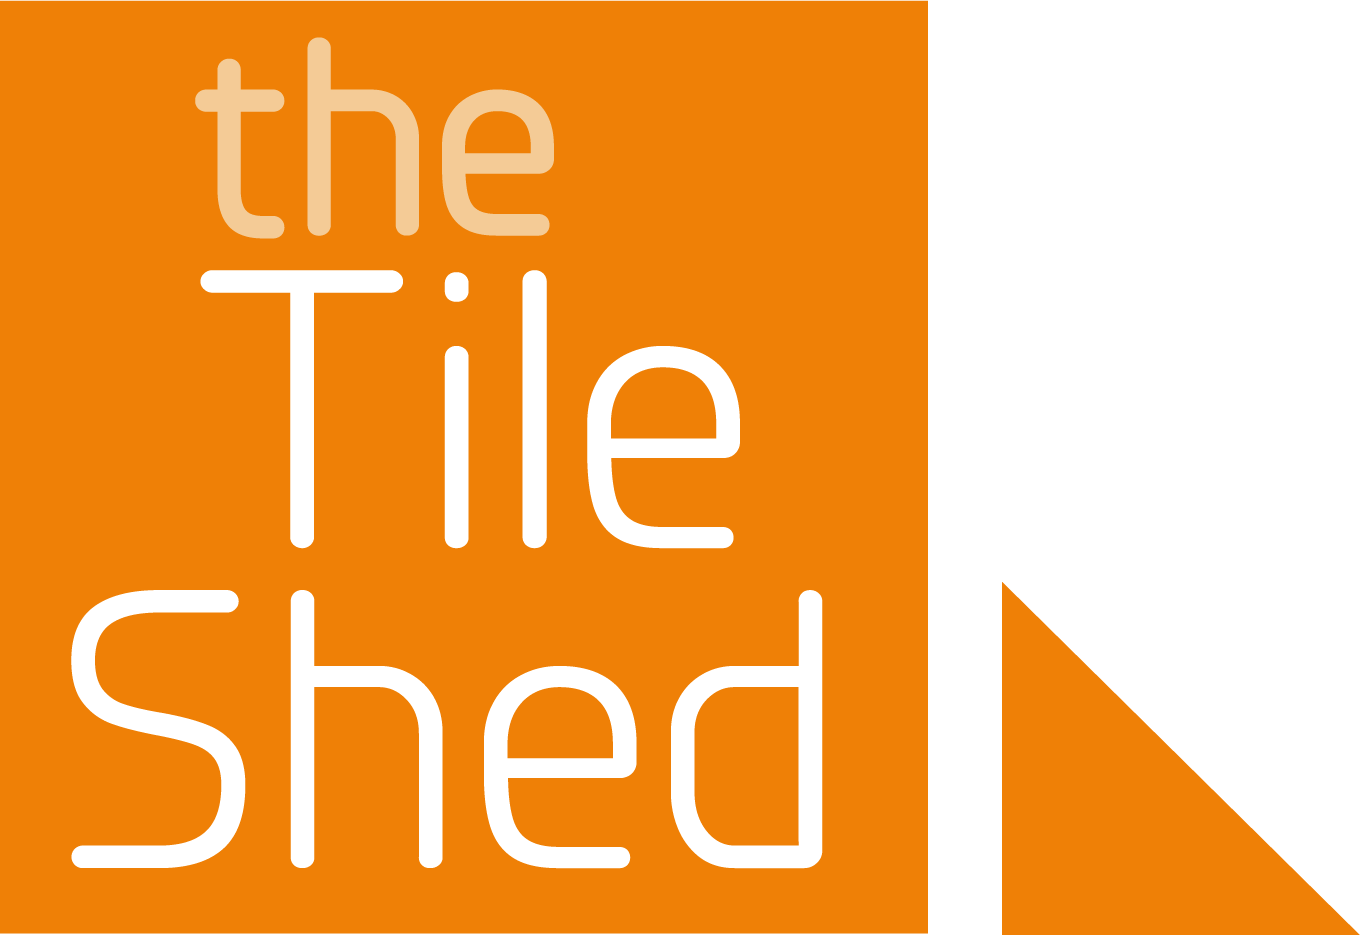 The Tile Shed